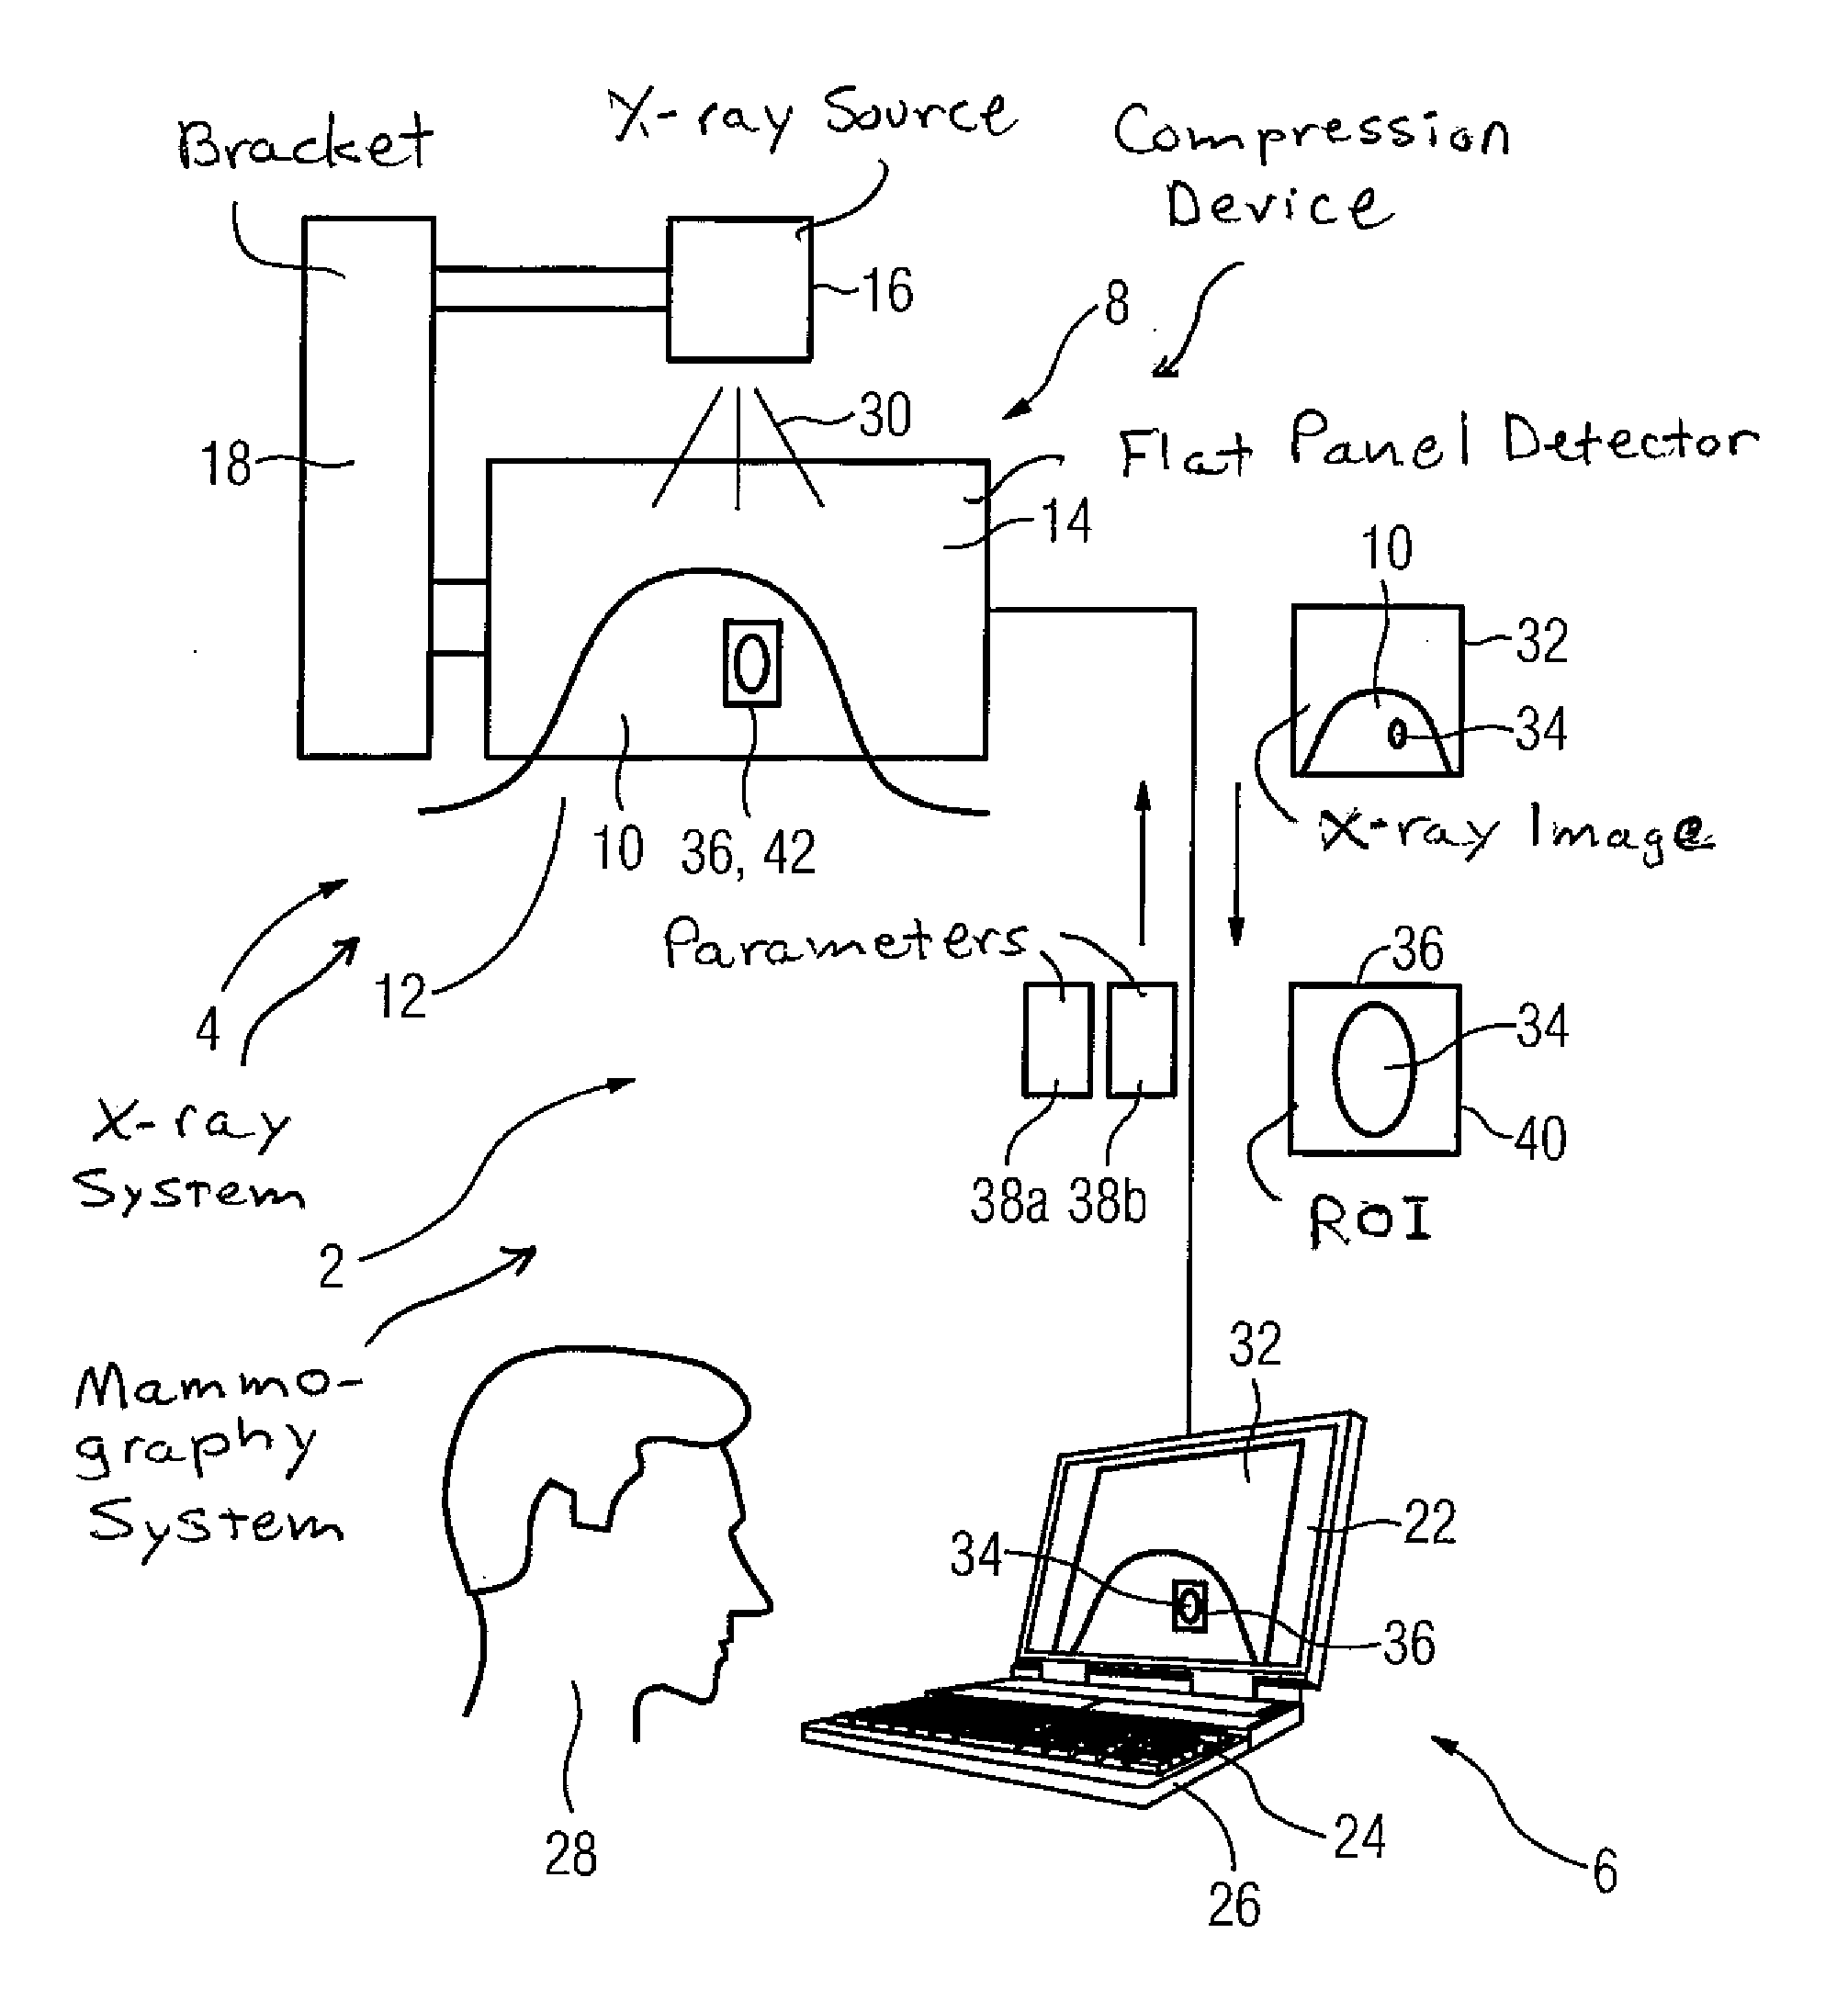 Method for producing an x-ray image during a mammography